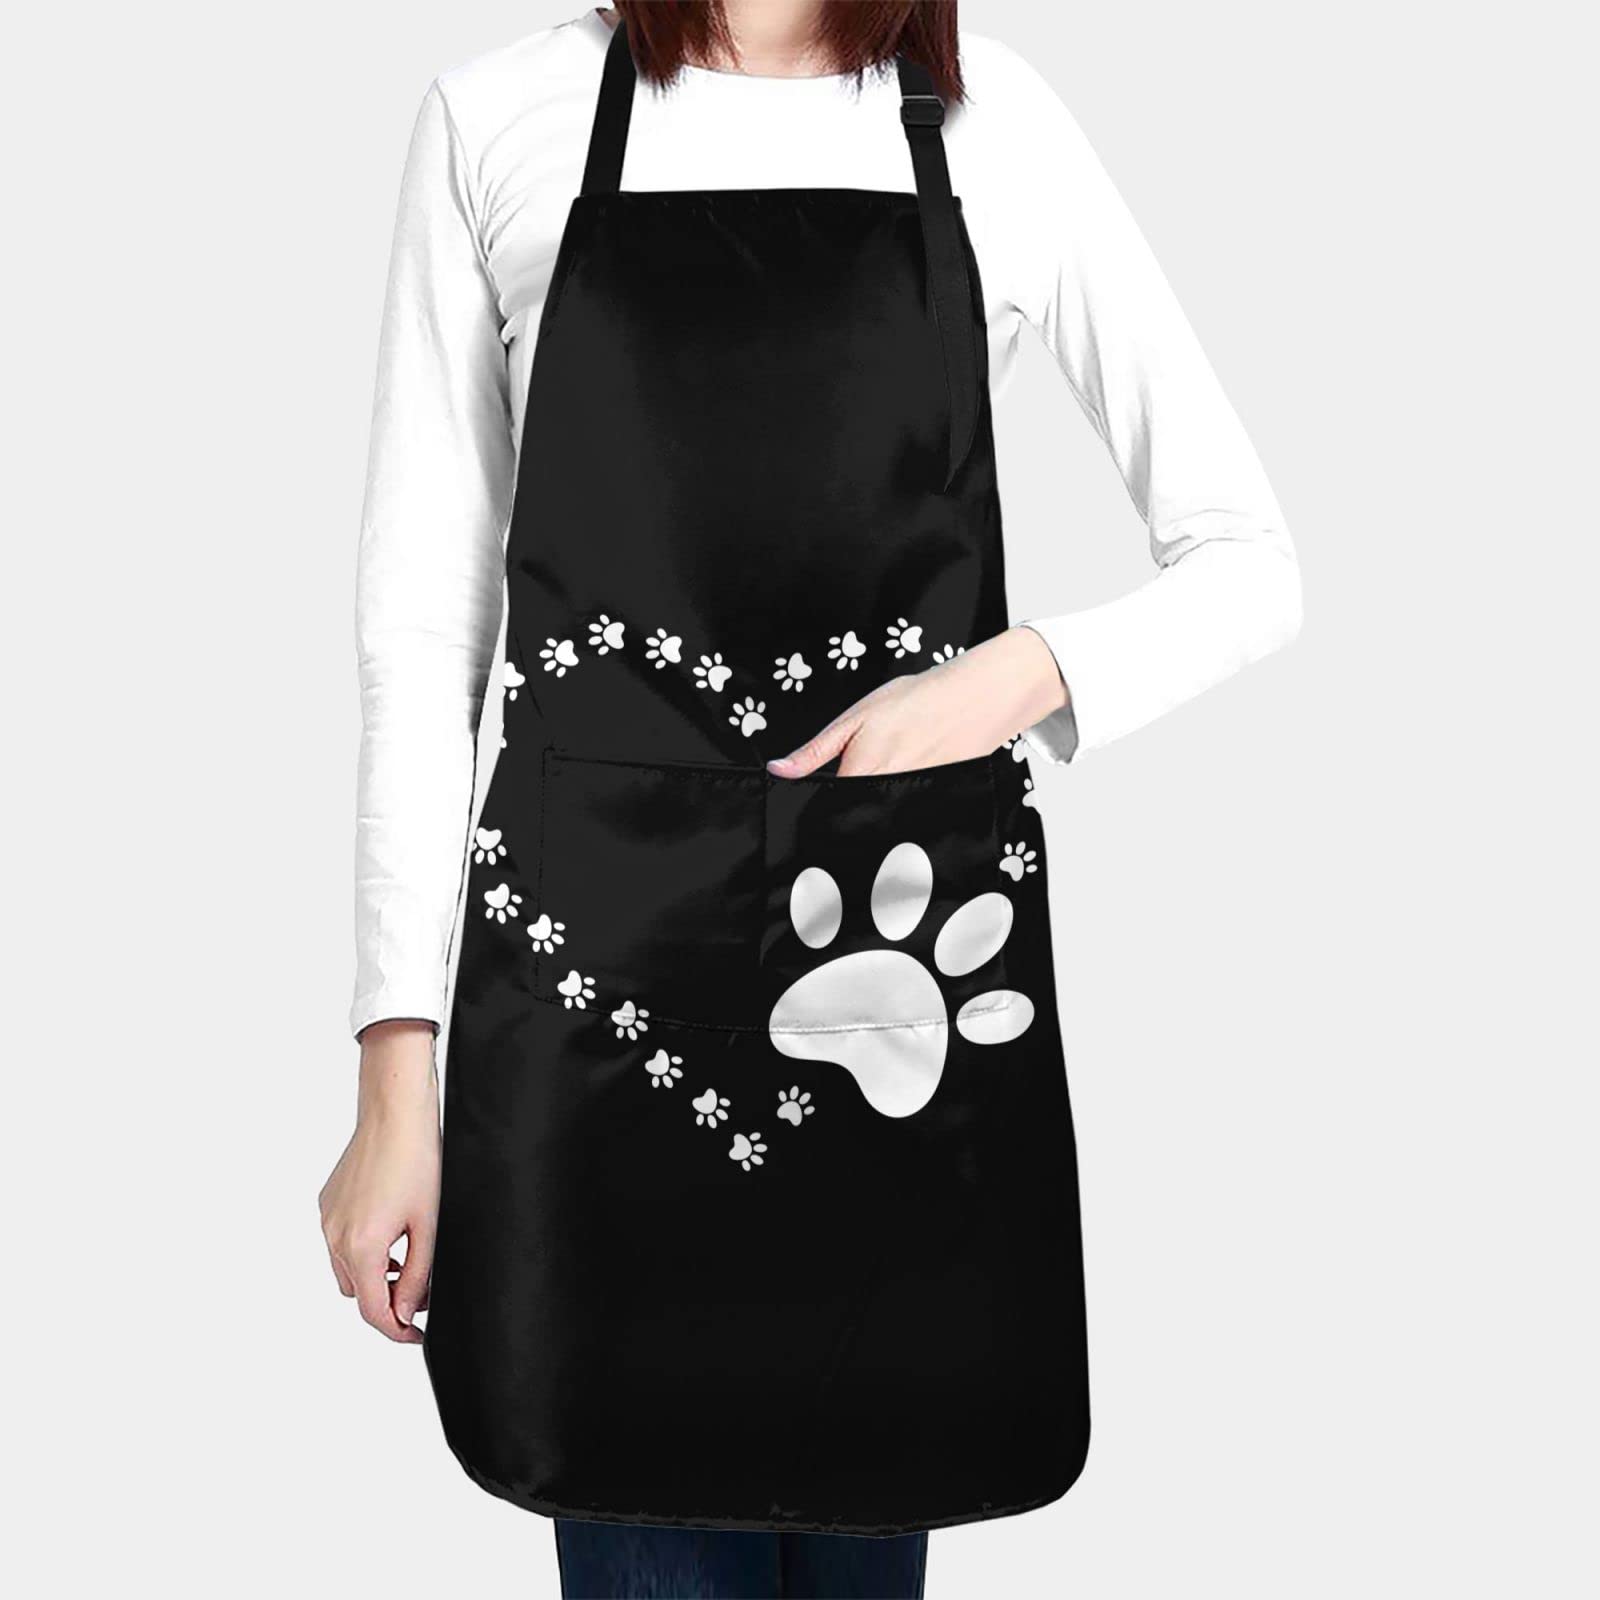 Dogs Cats Paws Prints Apron Adjustable Aprons with 2 Pockets for Women Men Waterproof Chefs Apron for Kitchen Painting Gardening Grooming